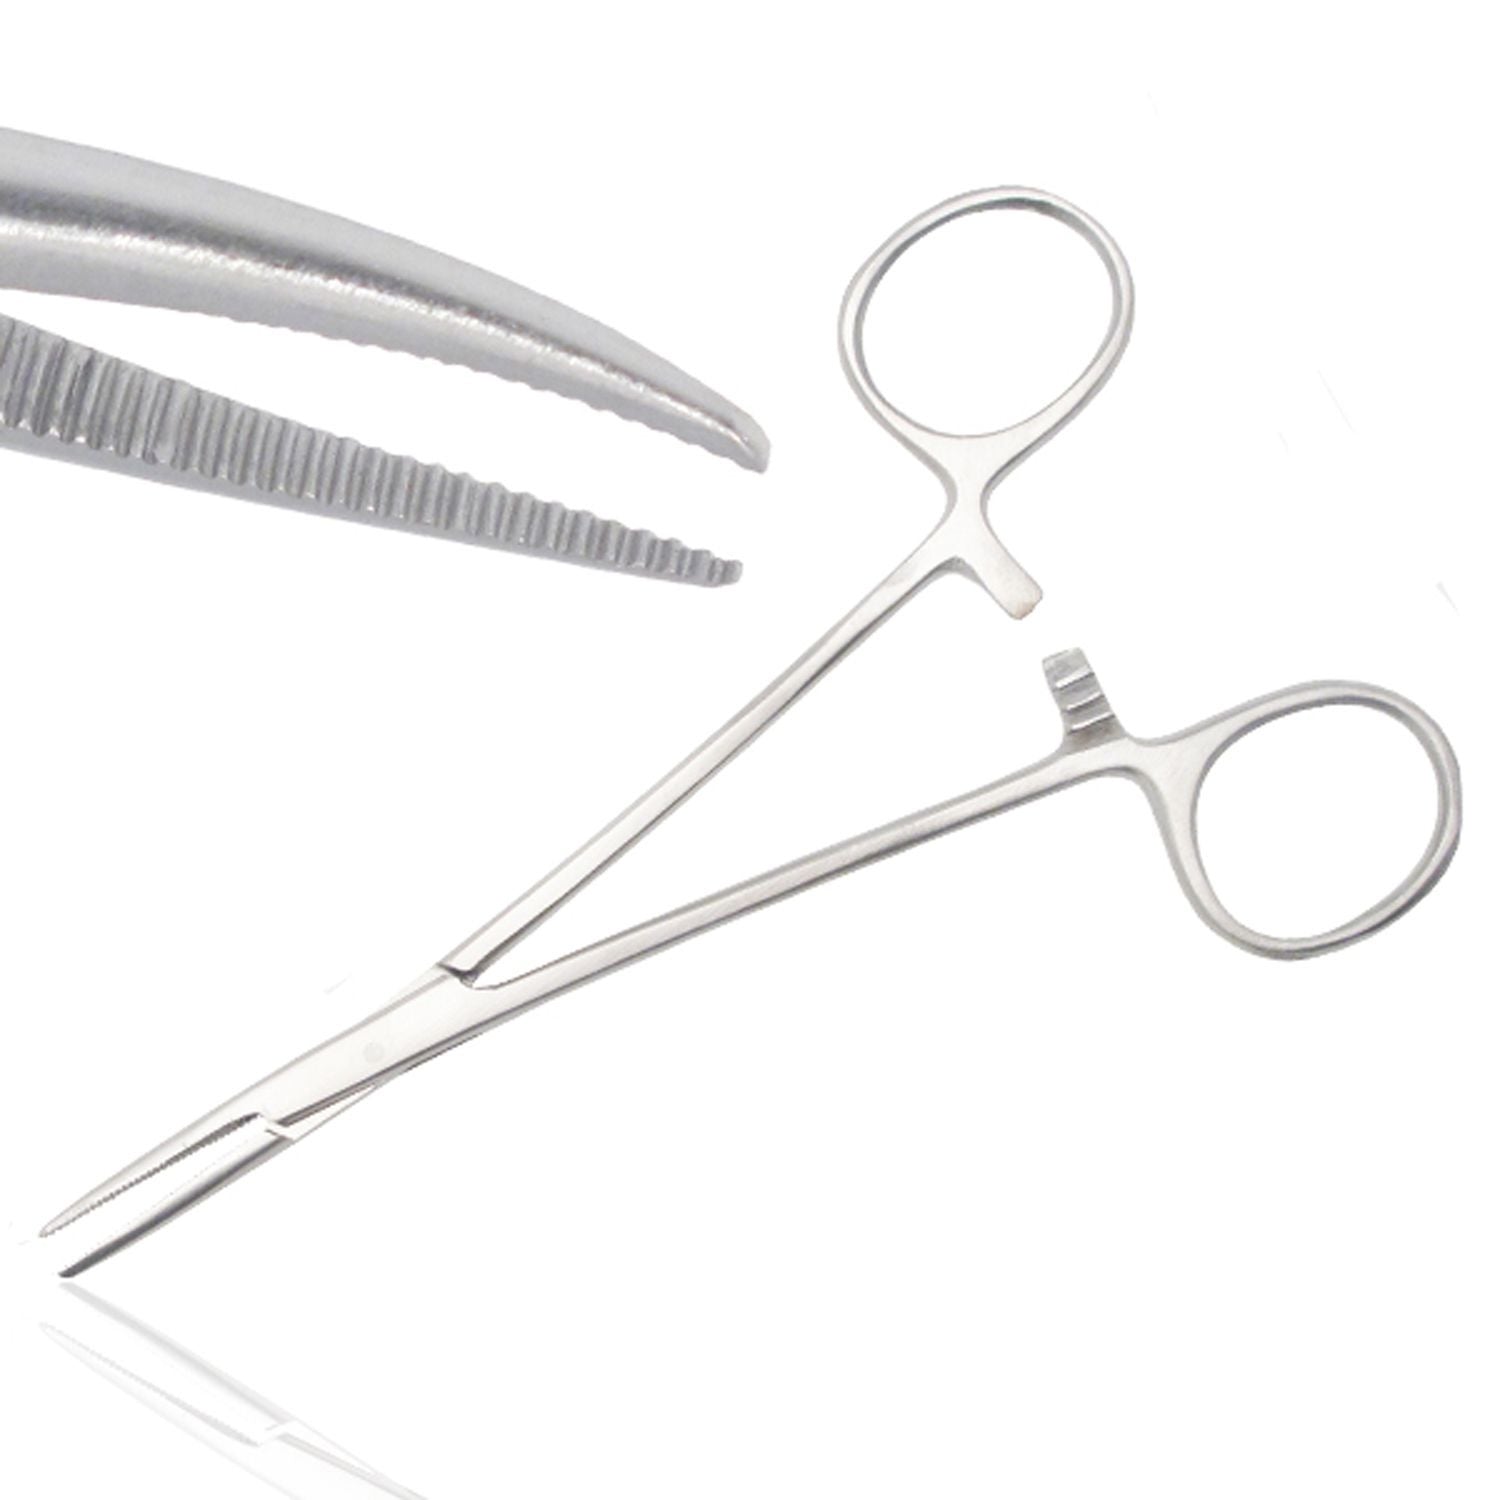 Instramed Halsted Mosquito Forceps | Curved | 12.5cm | Single